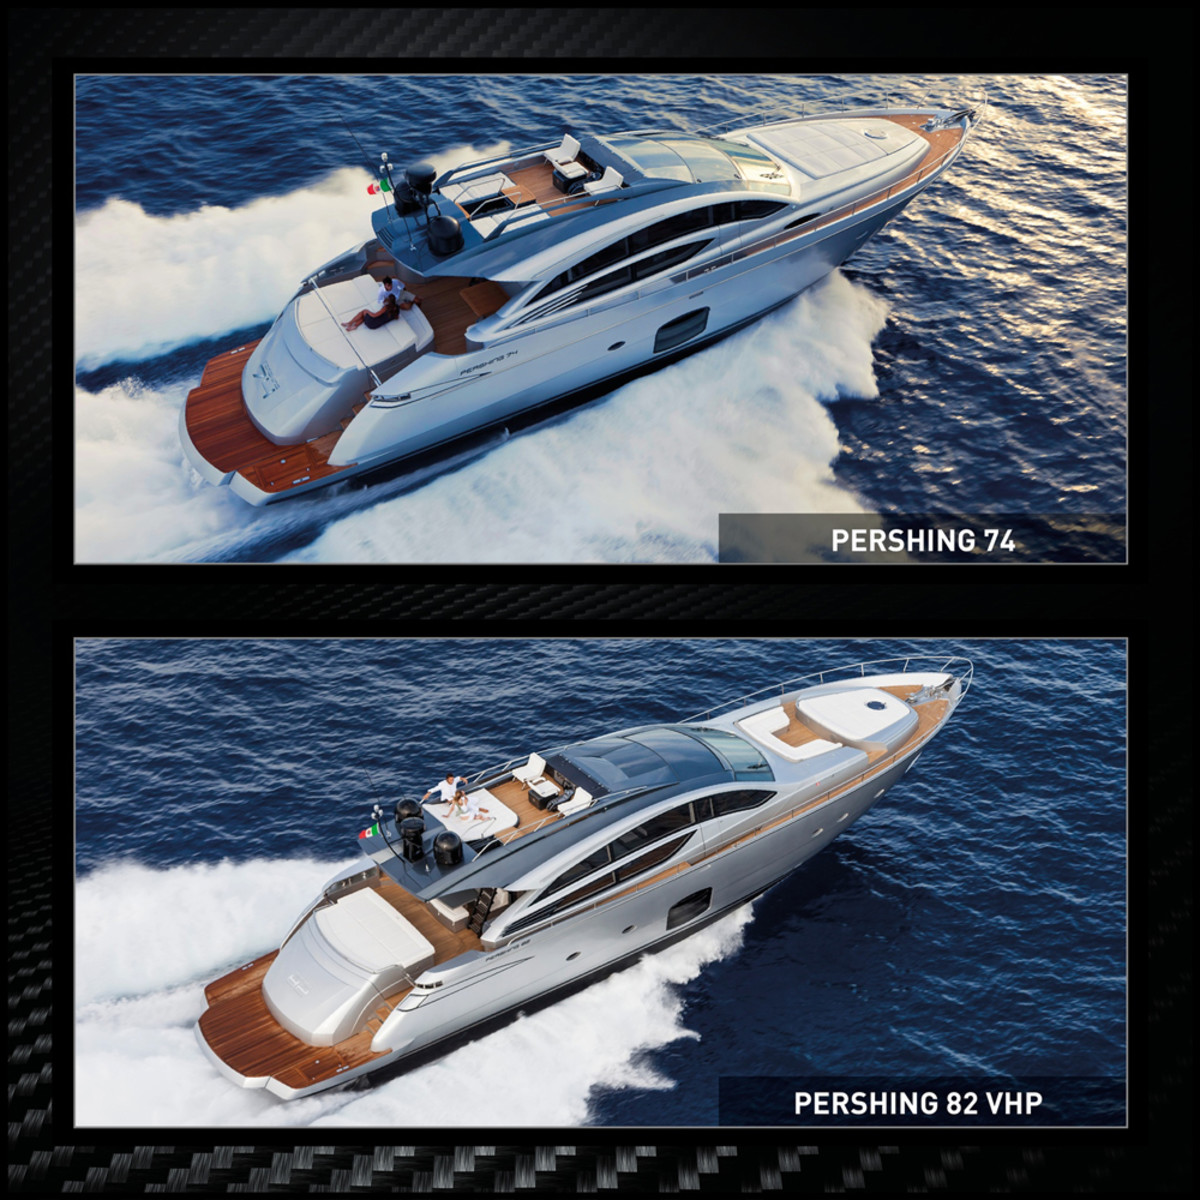 Pershing Yacht redesigned the interiors of its Pershing 74 (top) and Pershing 82 VHP coupes.